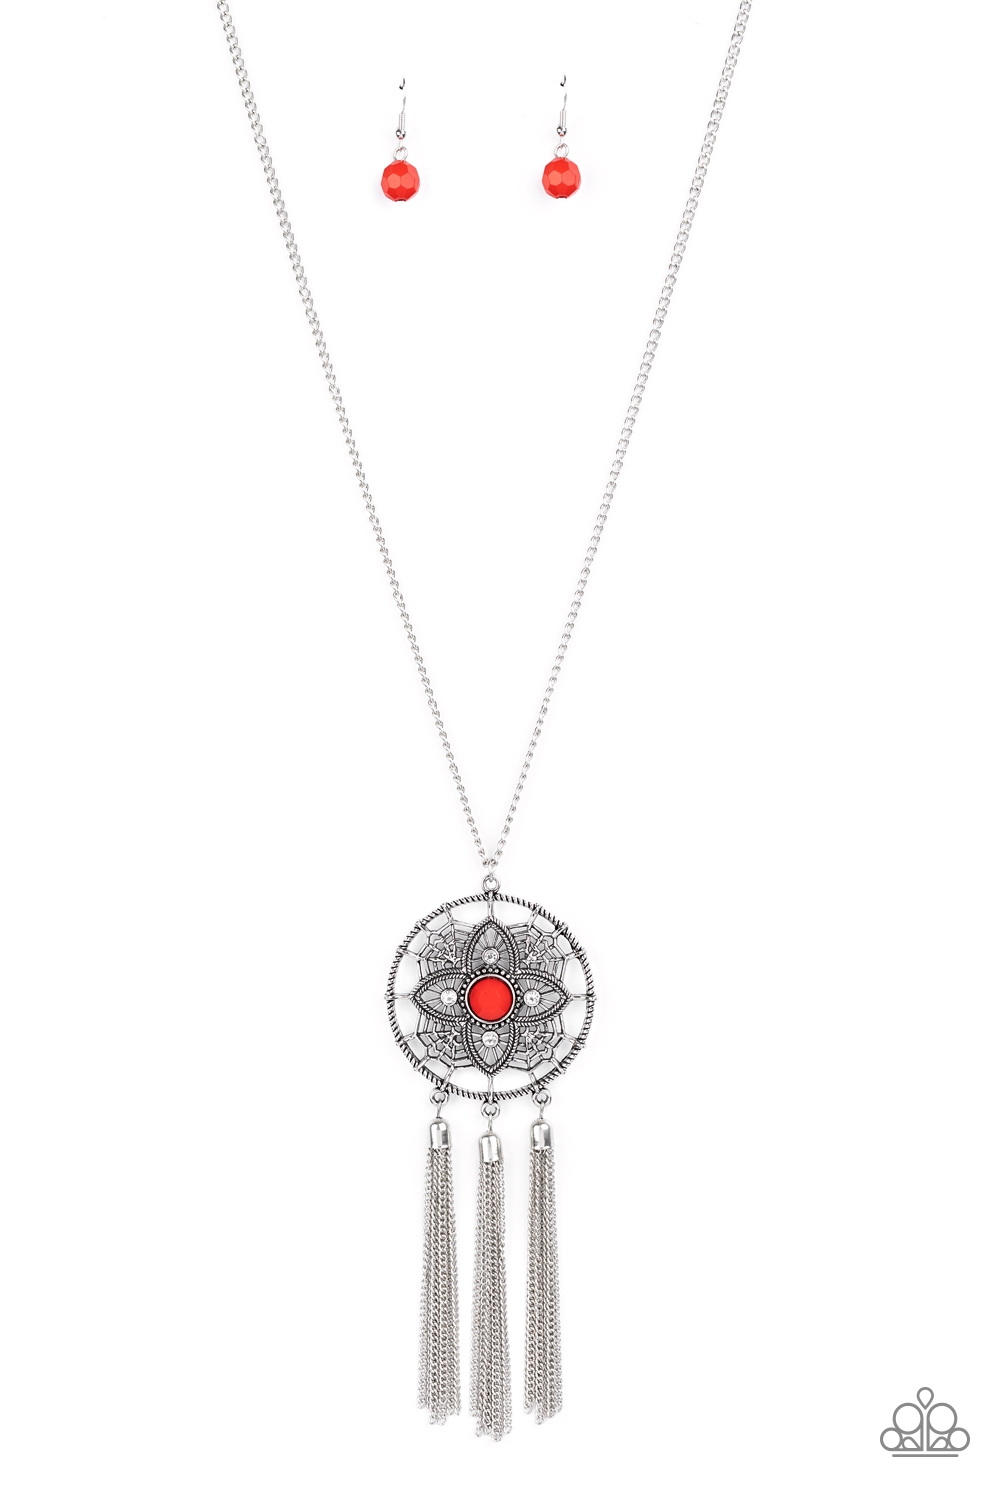 Necklace - Chasing Dreams - Red